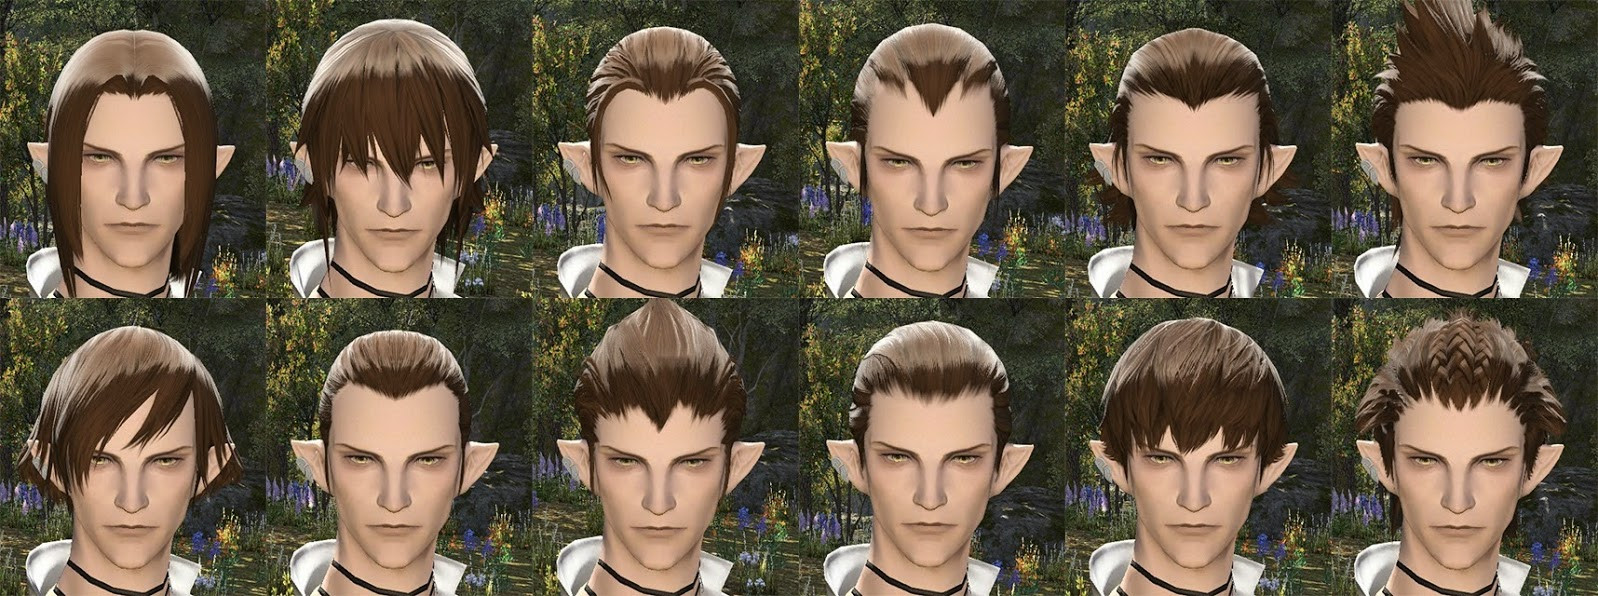 Ffxiv Male Hairstyles
 FFXIV Character Creation